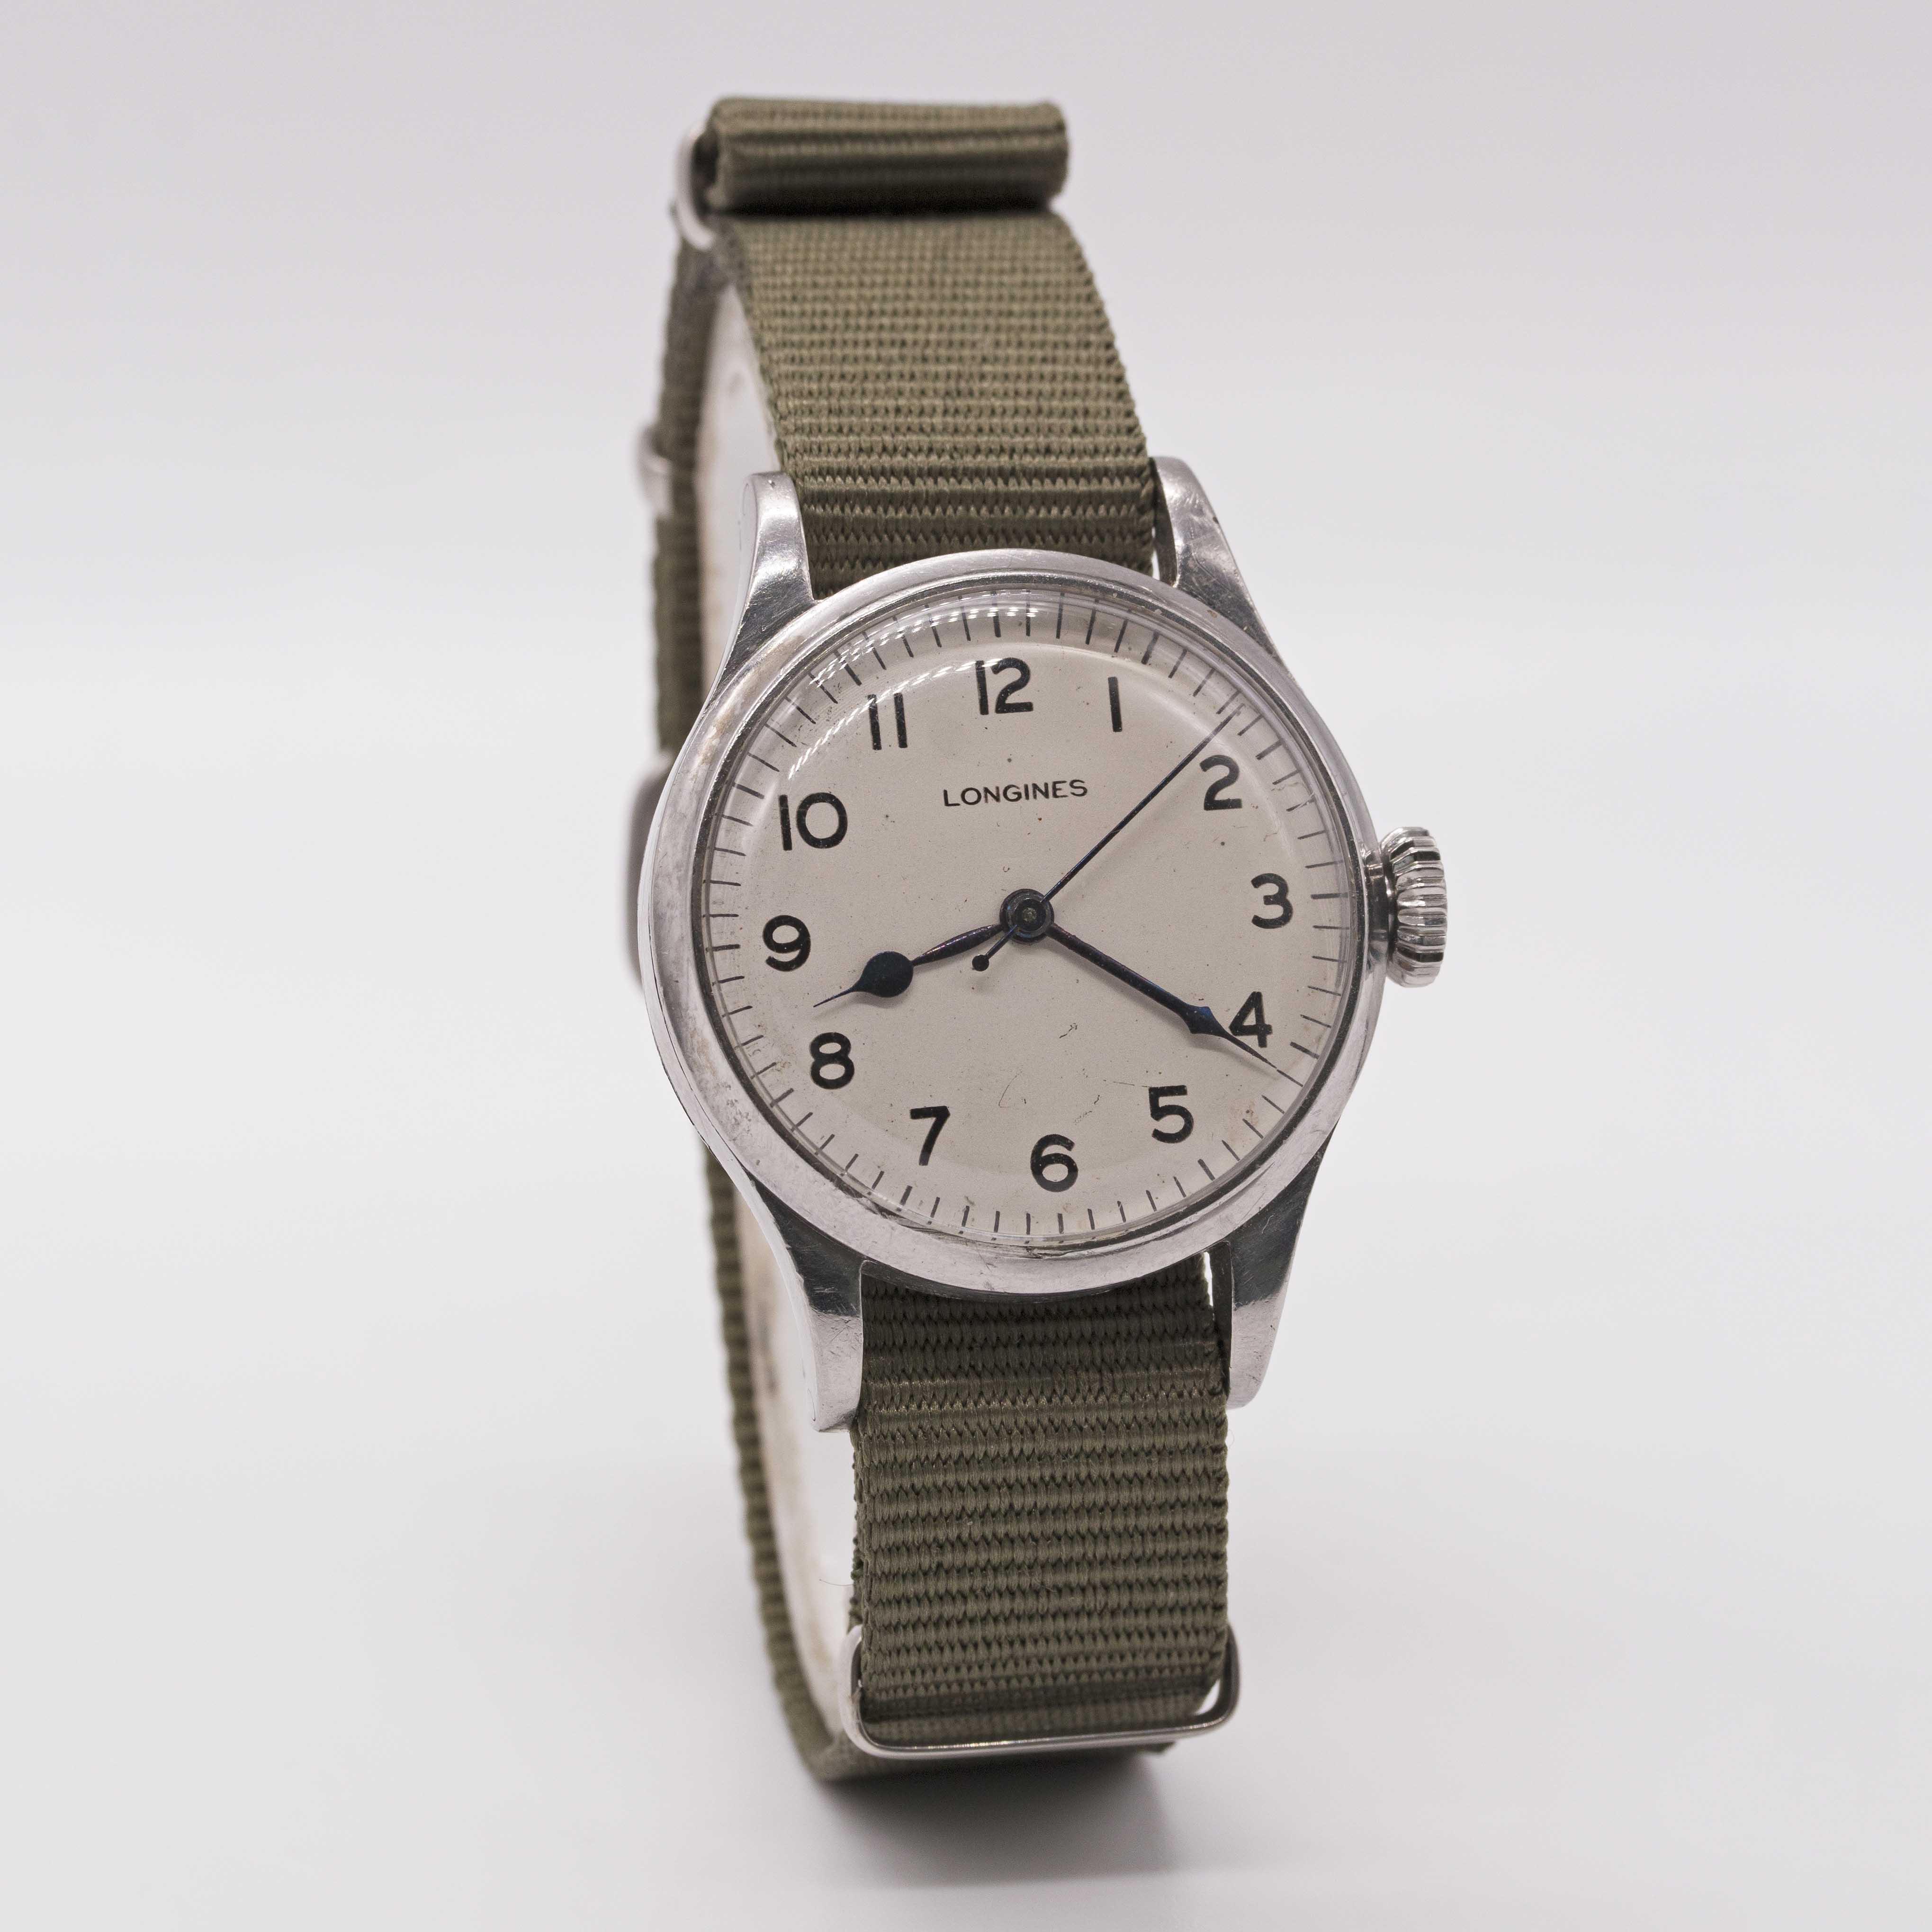 A GENTLEMAN'S BRITISH MILITARY LONGINES RAF PILOTS WRIST WATCH CIRCA 1940, WITH WHITE MOD DIAL - Image 5 of 9